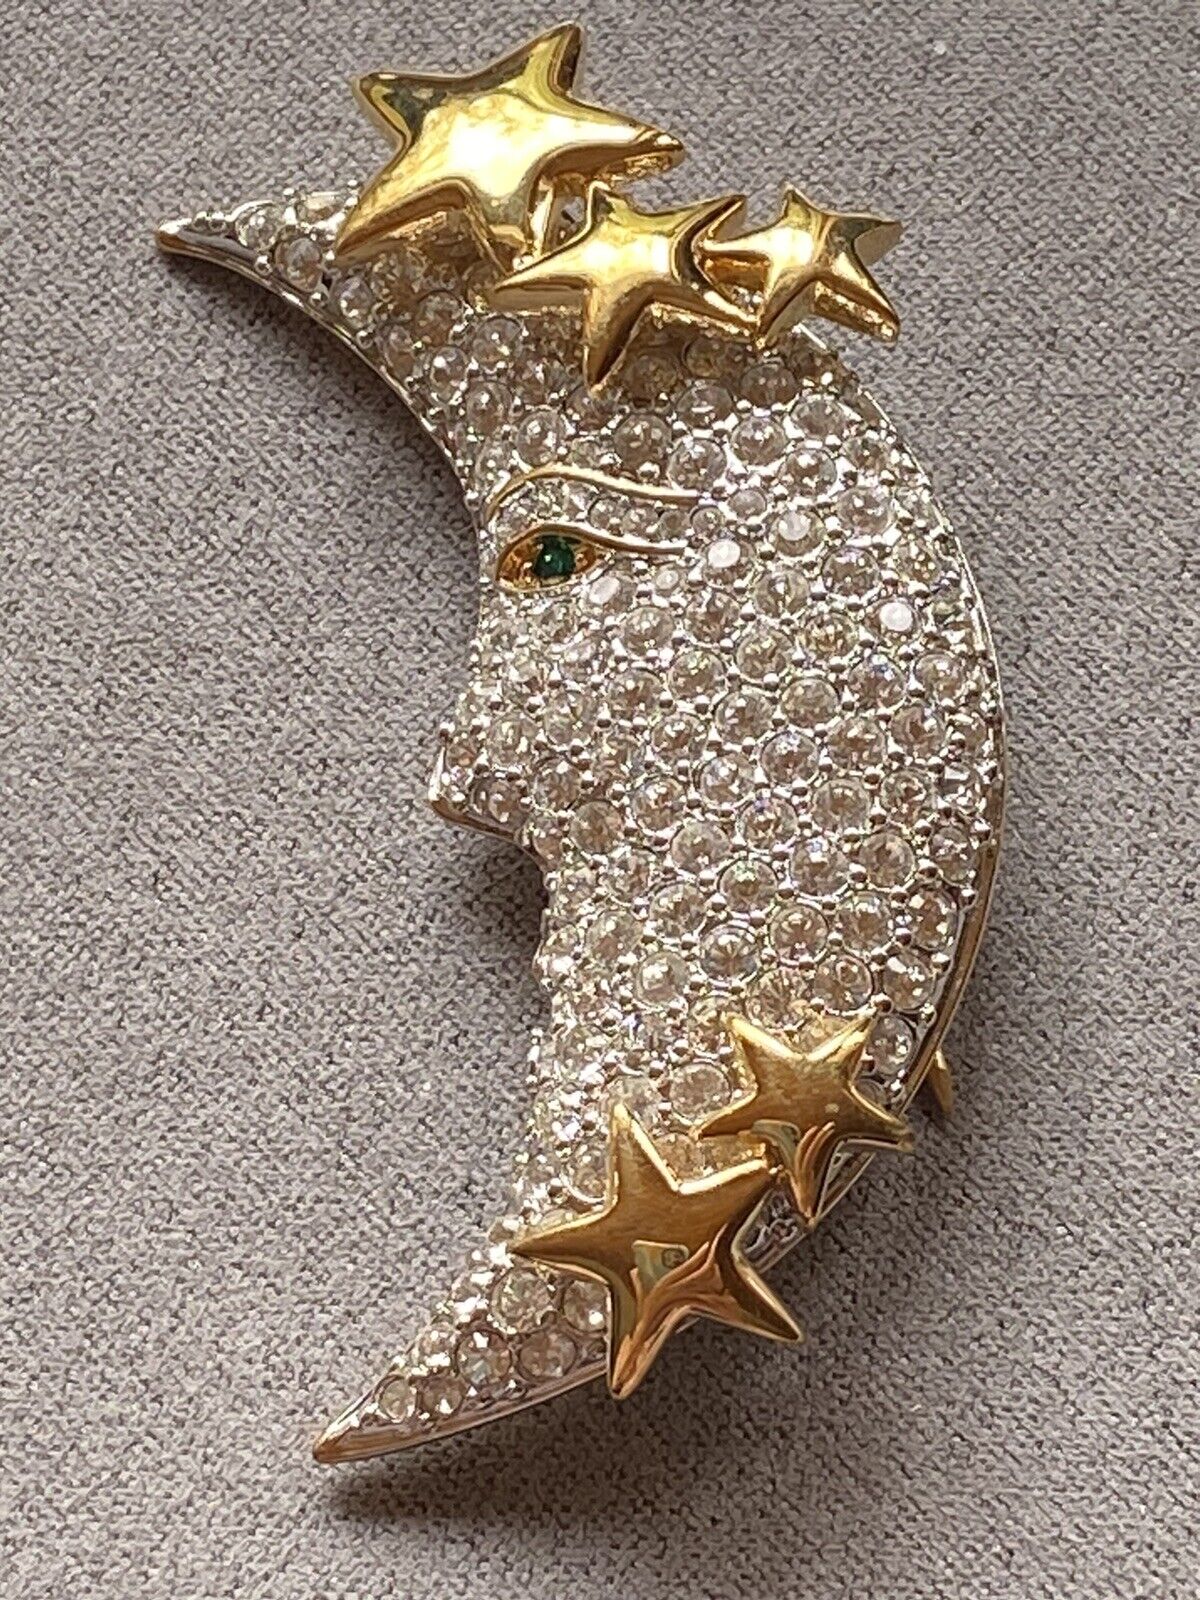 SIGNED SWAROVSKI PAVE\' MOON FACE STAR  PIN ~BROOCH RETIRED